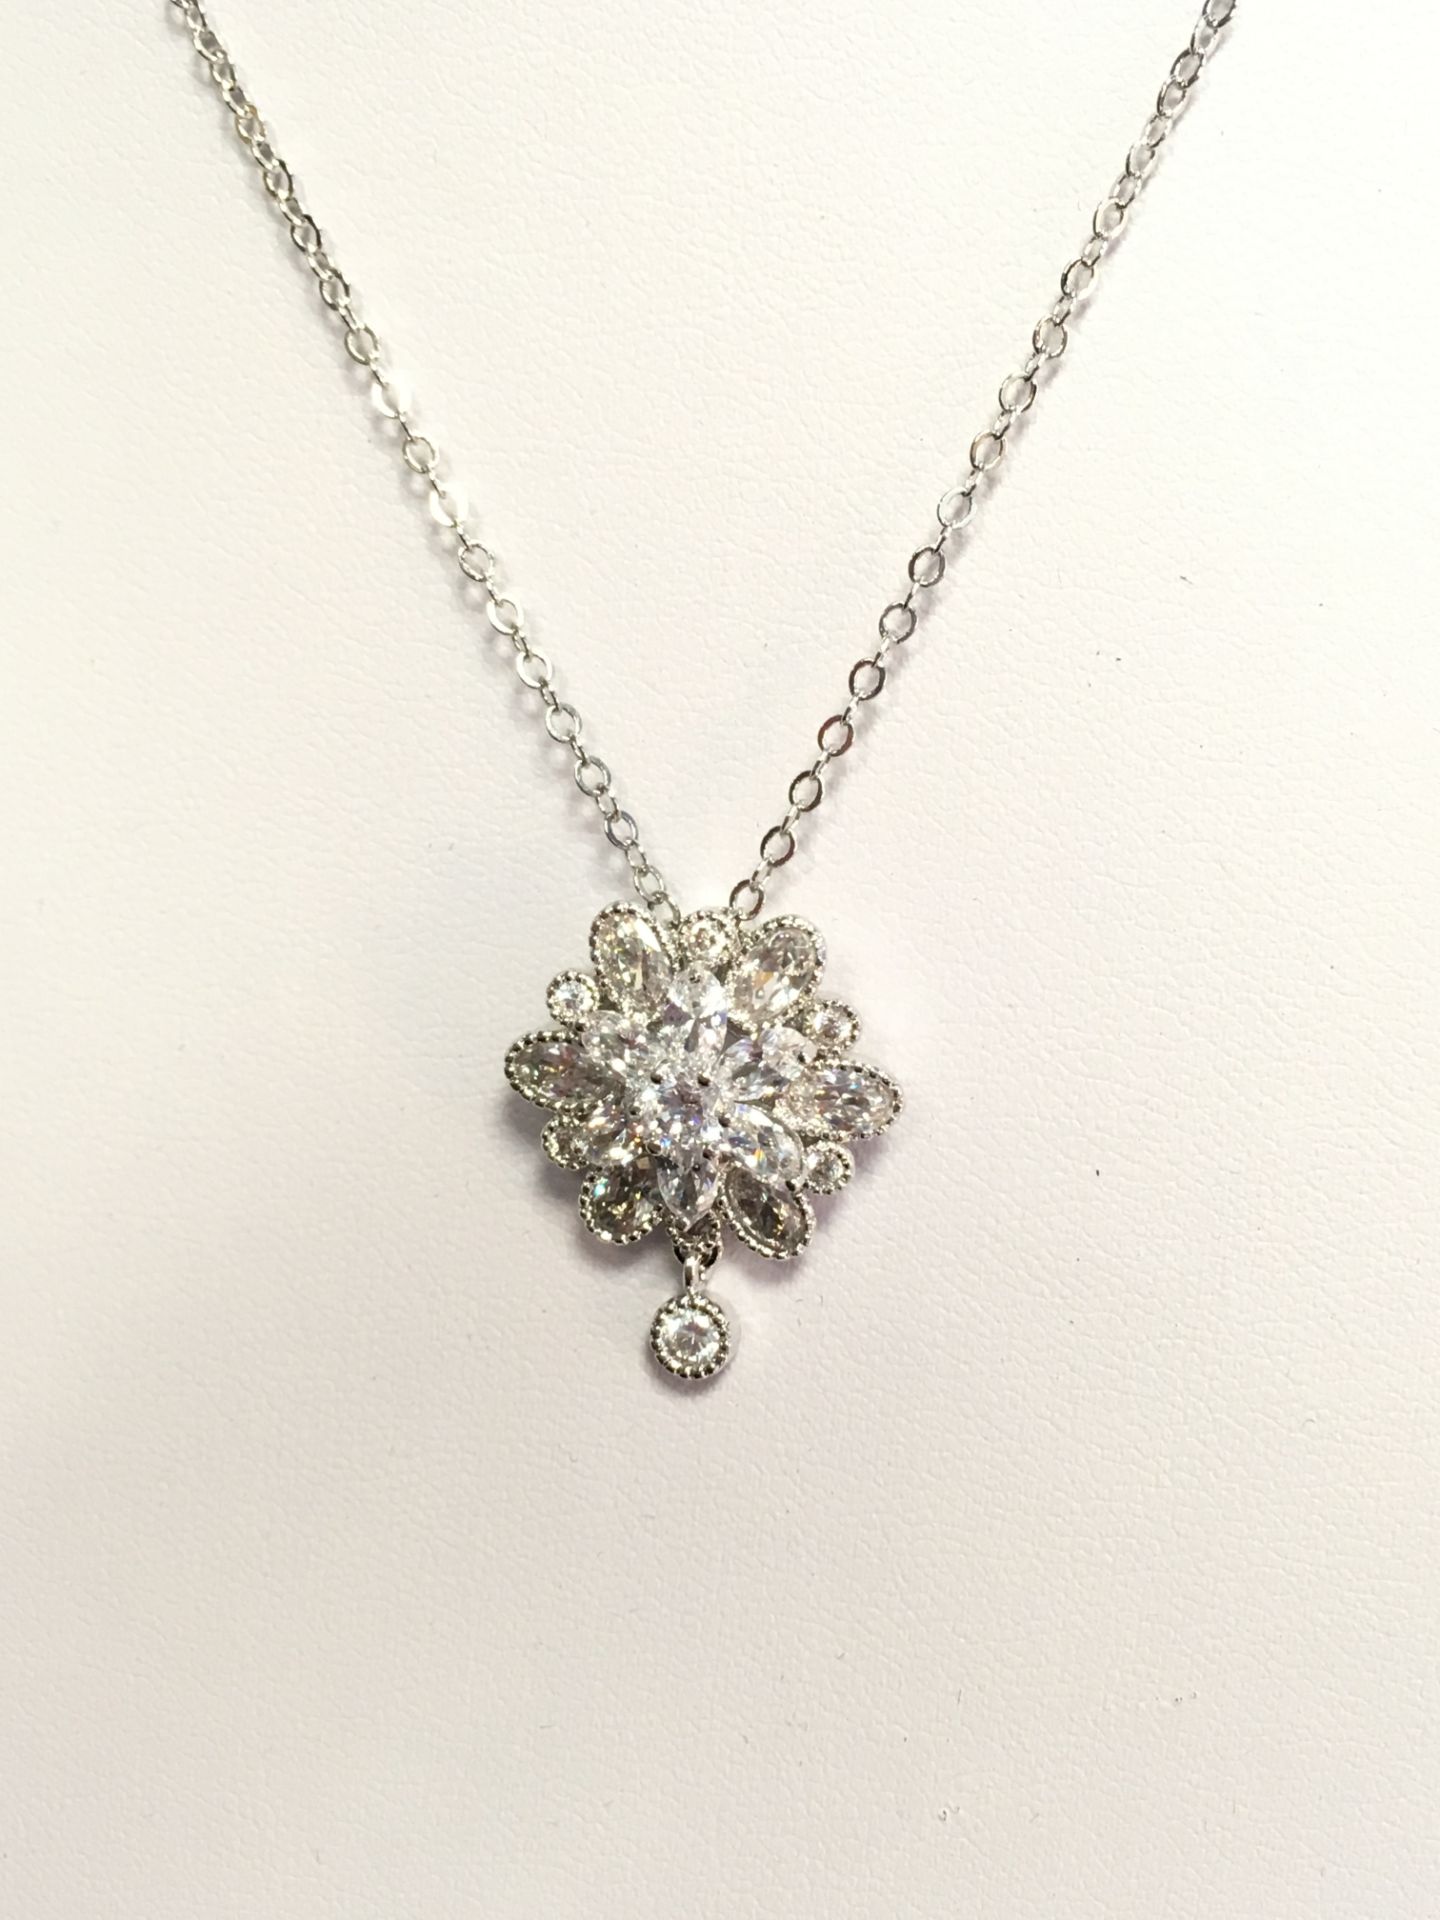 Brand New Platinum Plated, AAA Zirconia Flower Pendant Necklace, Earring and Ring Set - Image 4 of 4